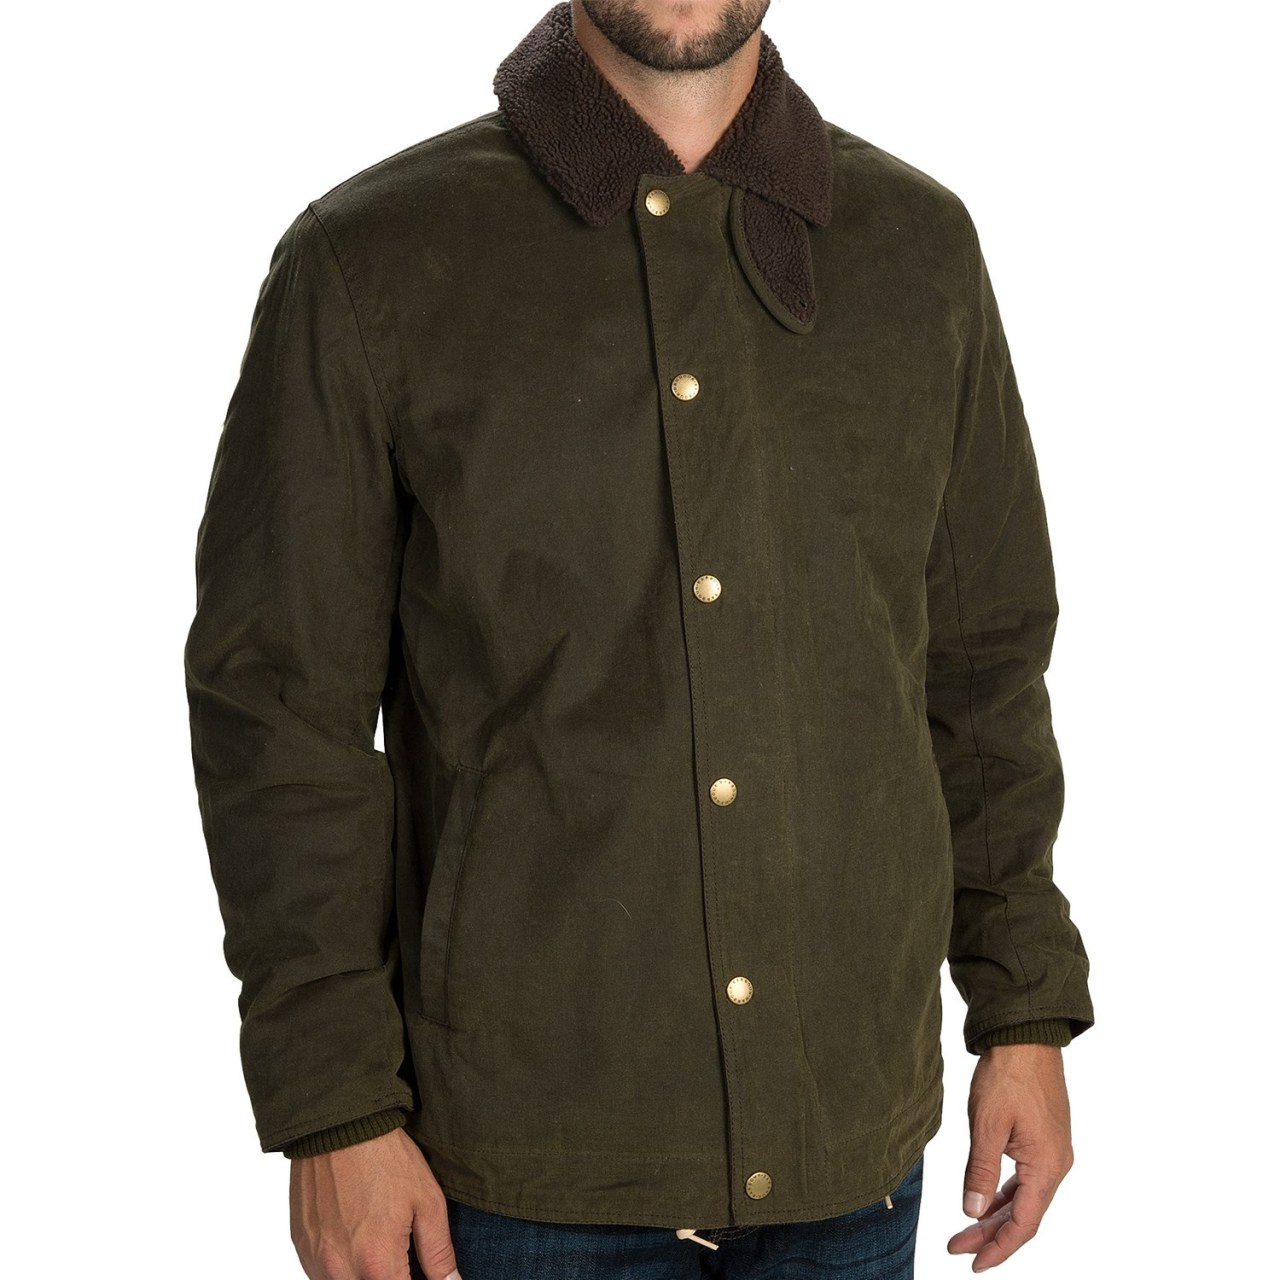 It's On Sale: Barbour Jackets – Put This On